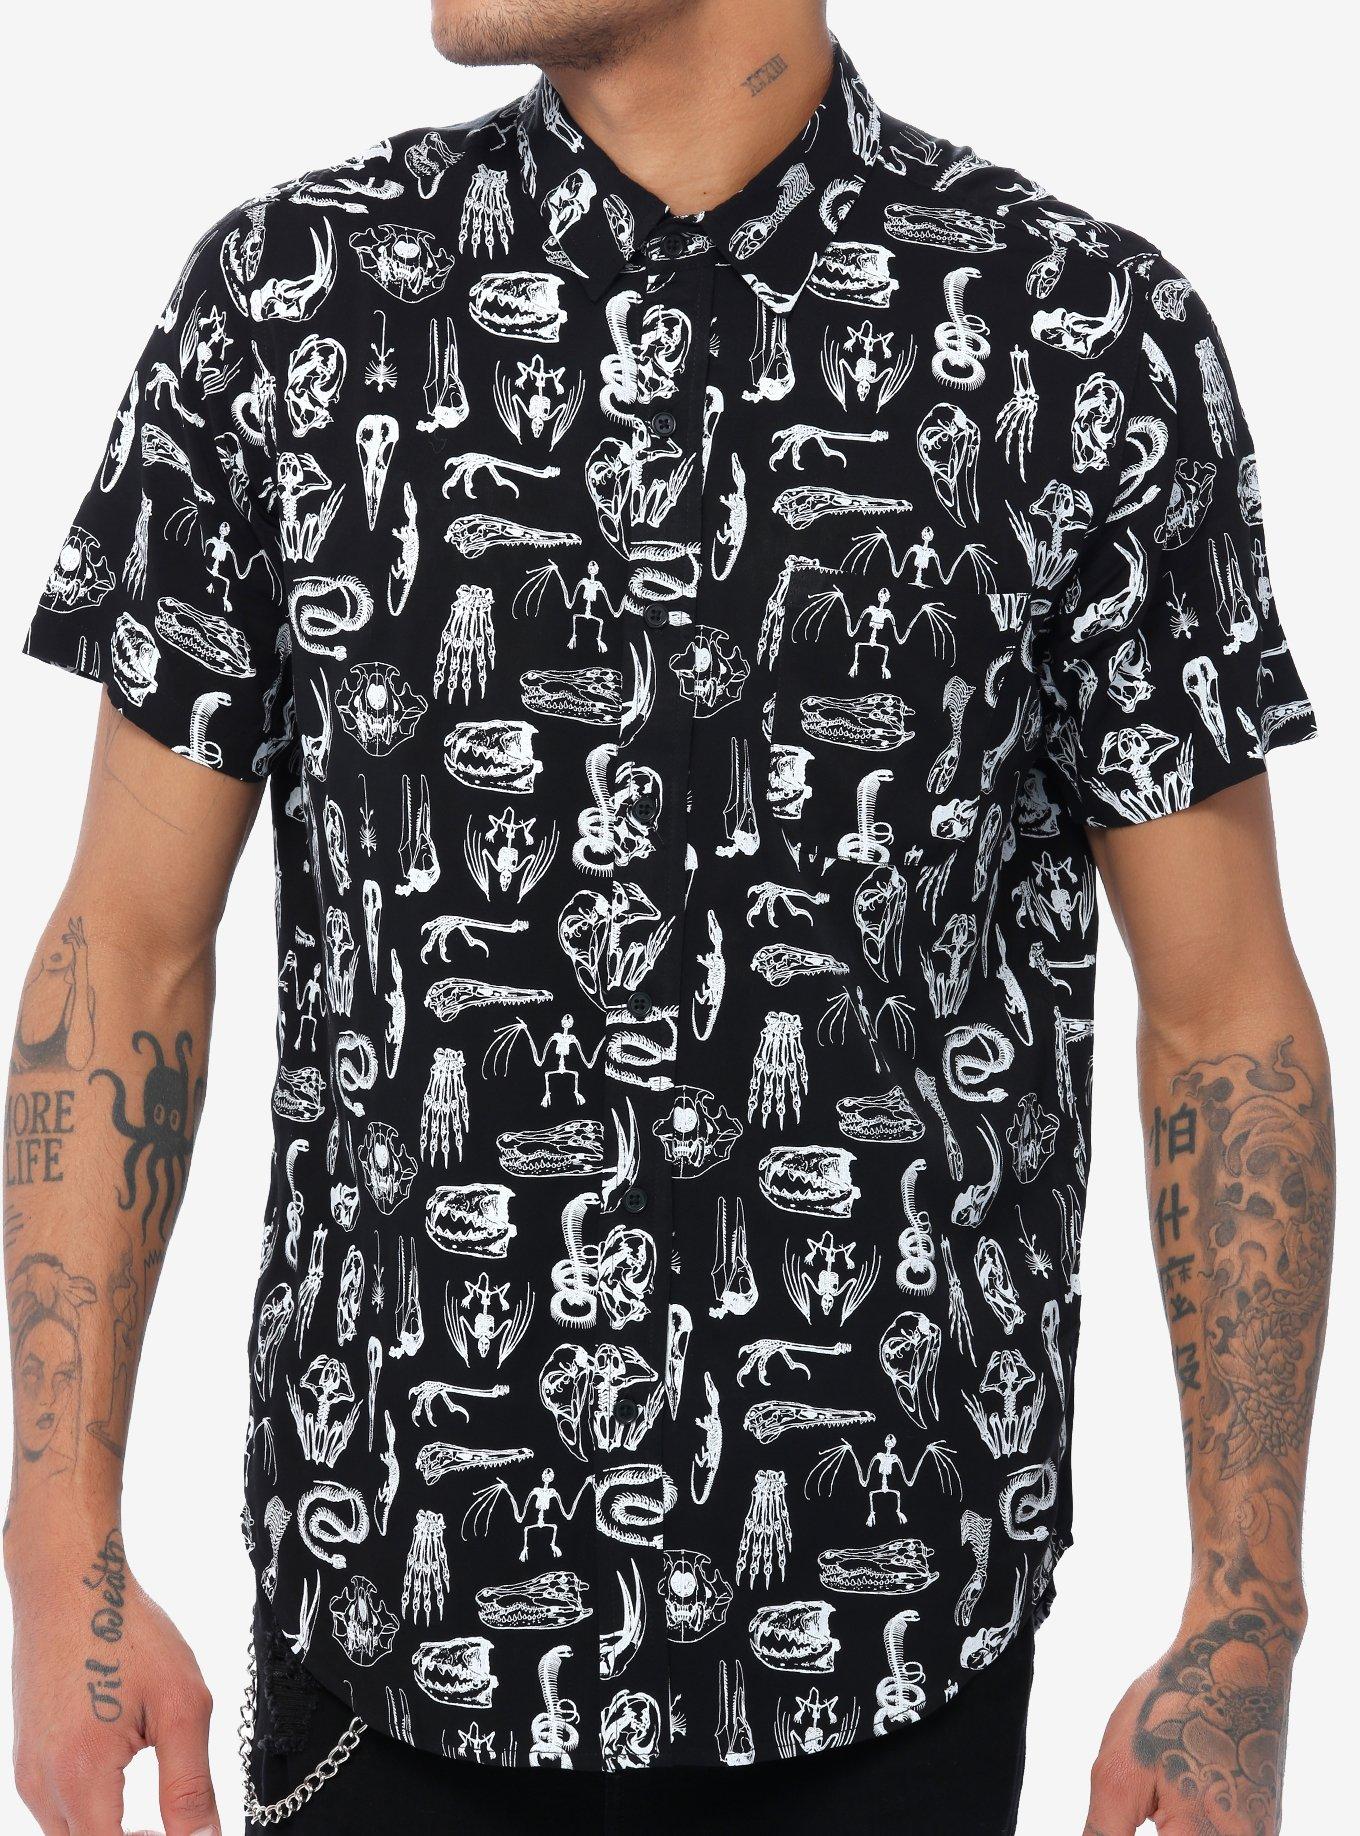 Creature Skeletons Woven Button-Up, BLACK, hi-res